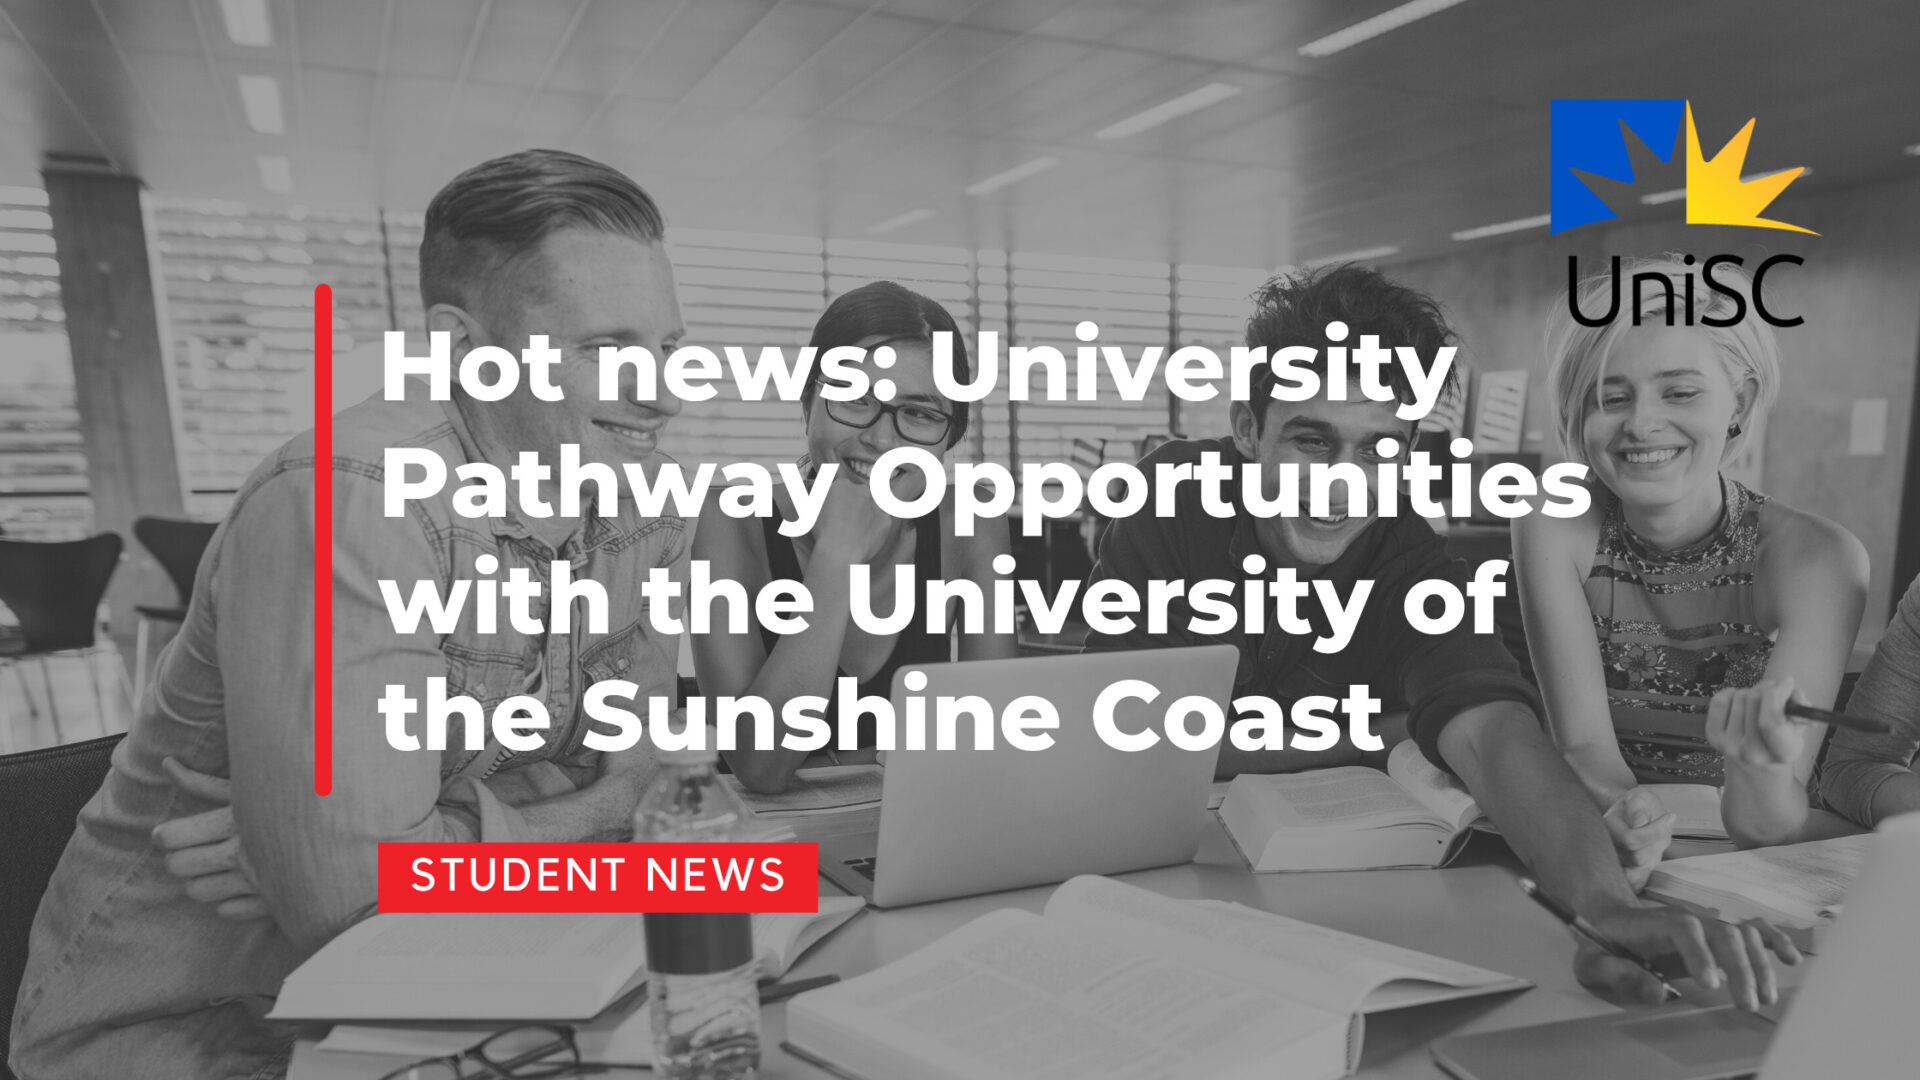 Hot news: University Pathway Opportunities with the University of the Sunshine Coast